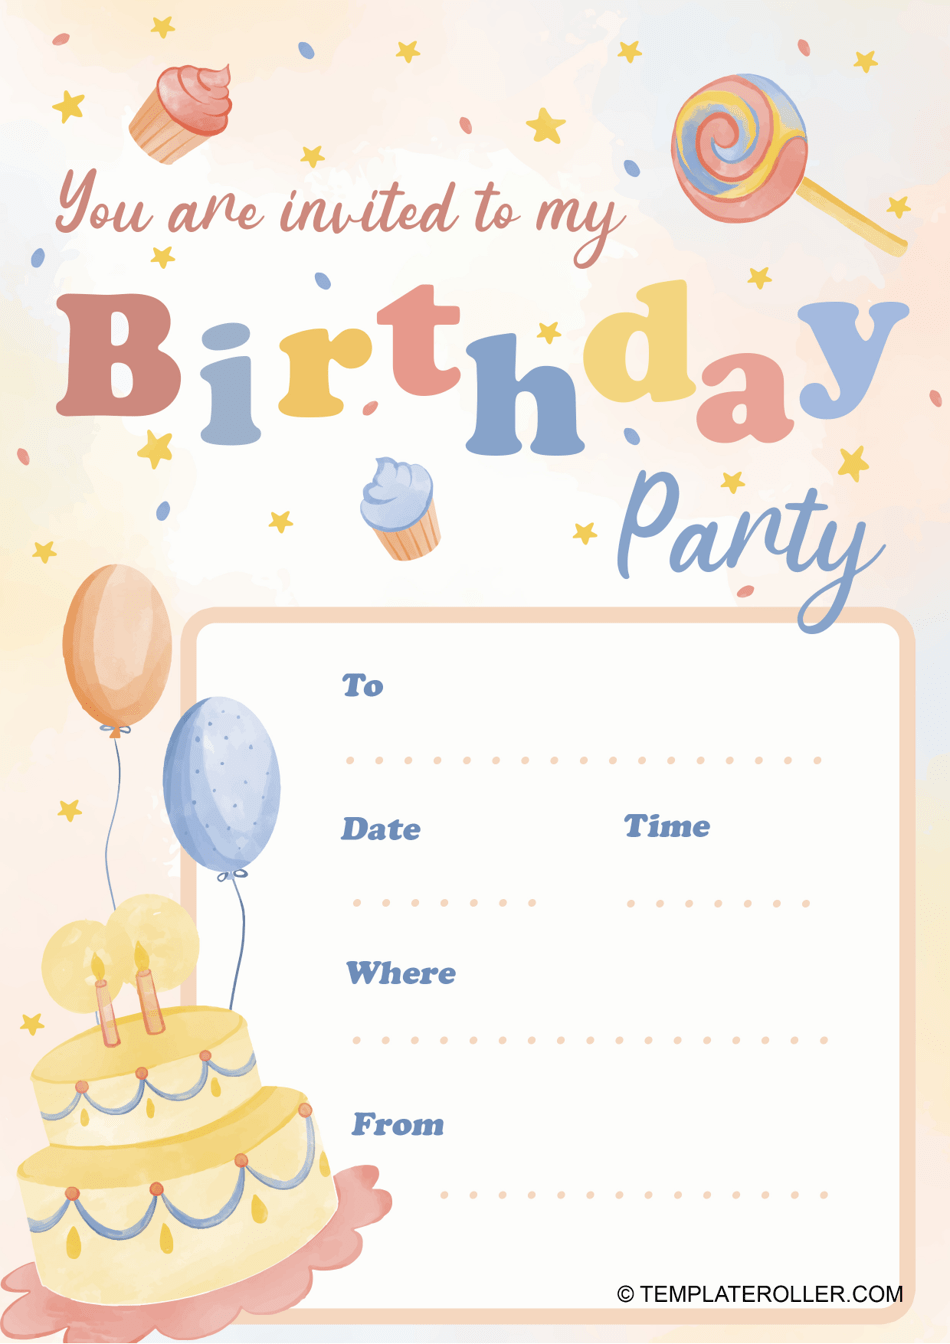 Birthday Party Invitation Template - Beige Download Printable PDF ...